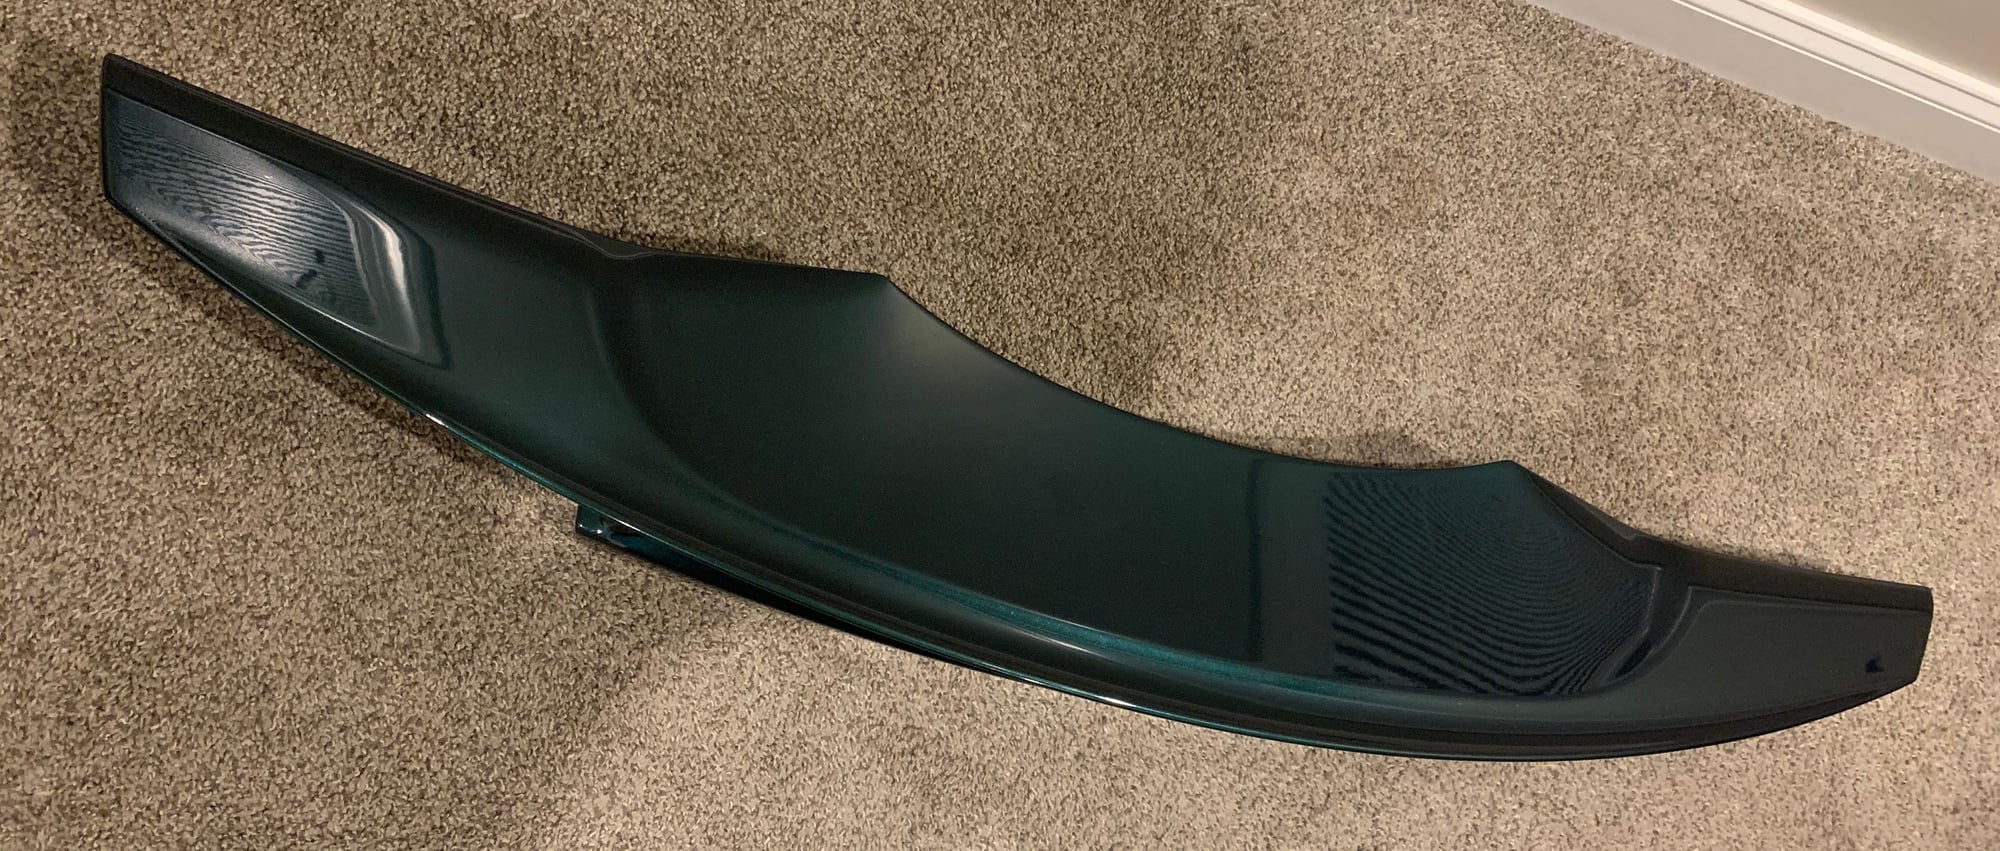 Exterior Body Parts - OEM fixed wing - British Racing Green - Used - 2015 to 2020 Jaguar F-Type - Butler, PA 16001, United States